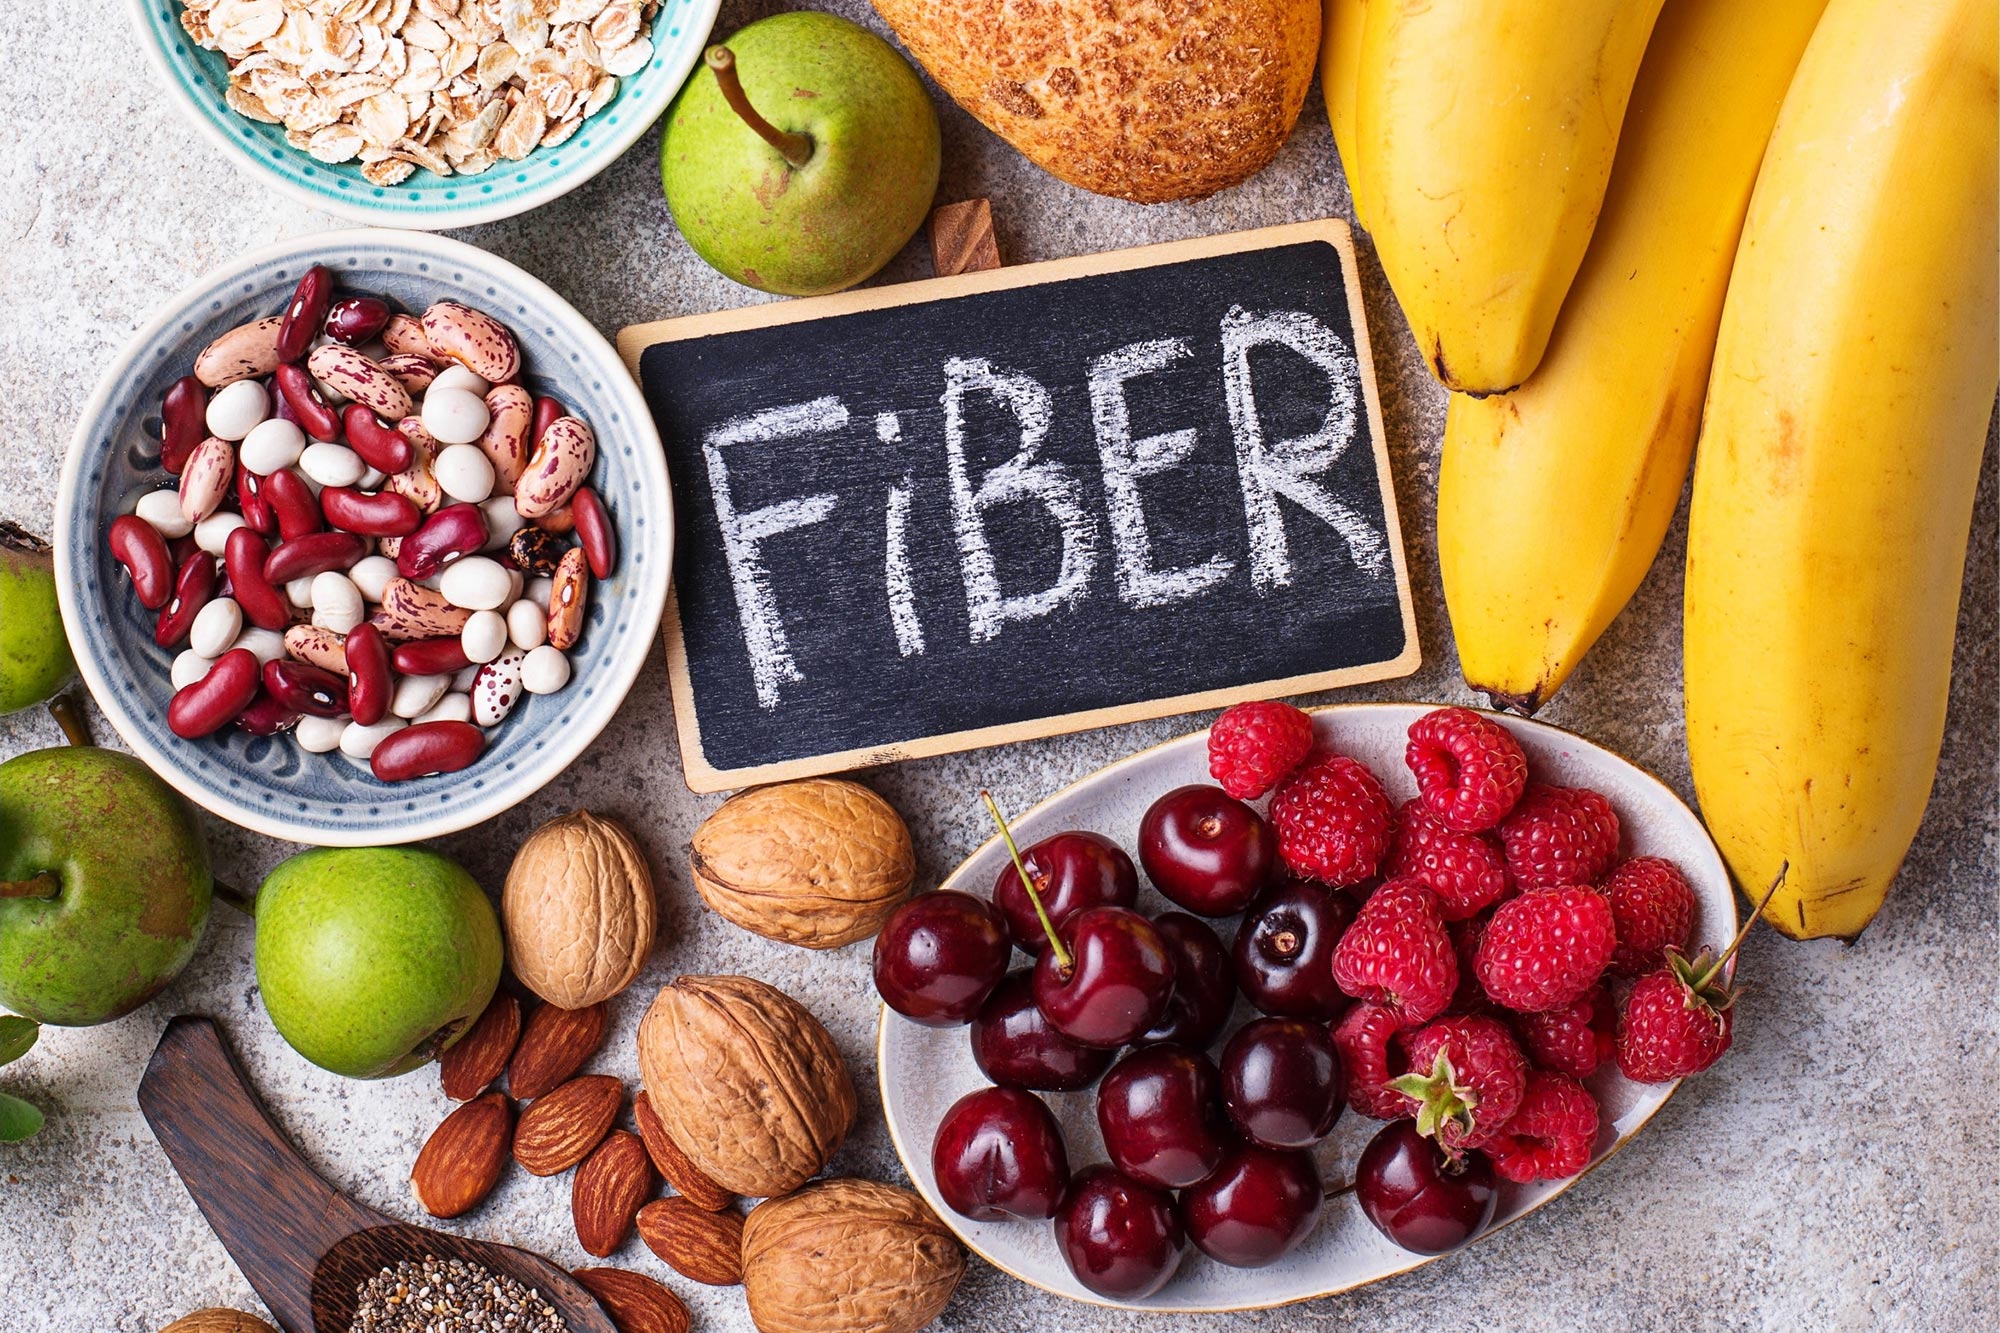 Not All Dietary Fibers Are Equal – Health Benefits of Dietary Fiber Vary